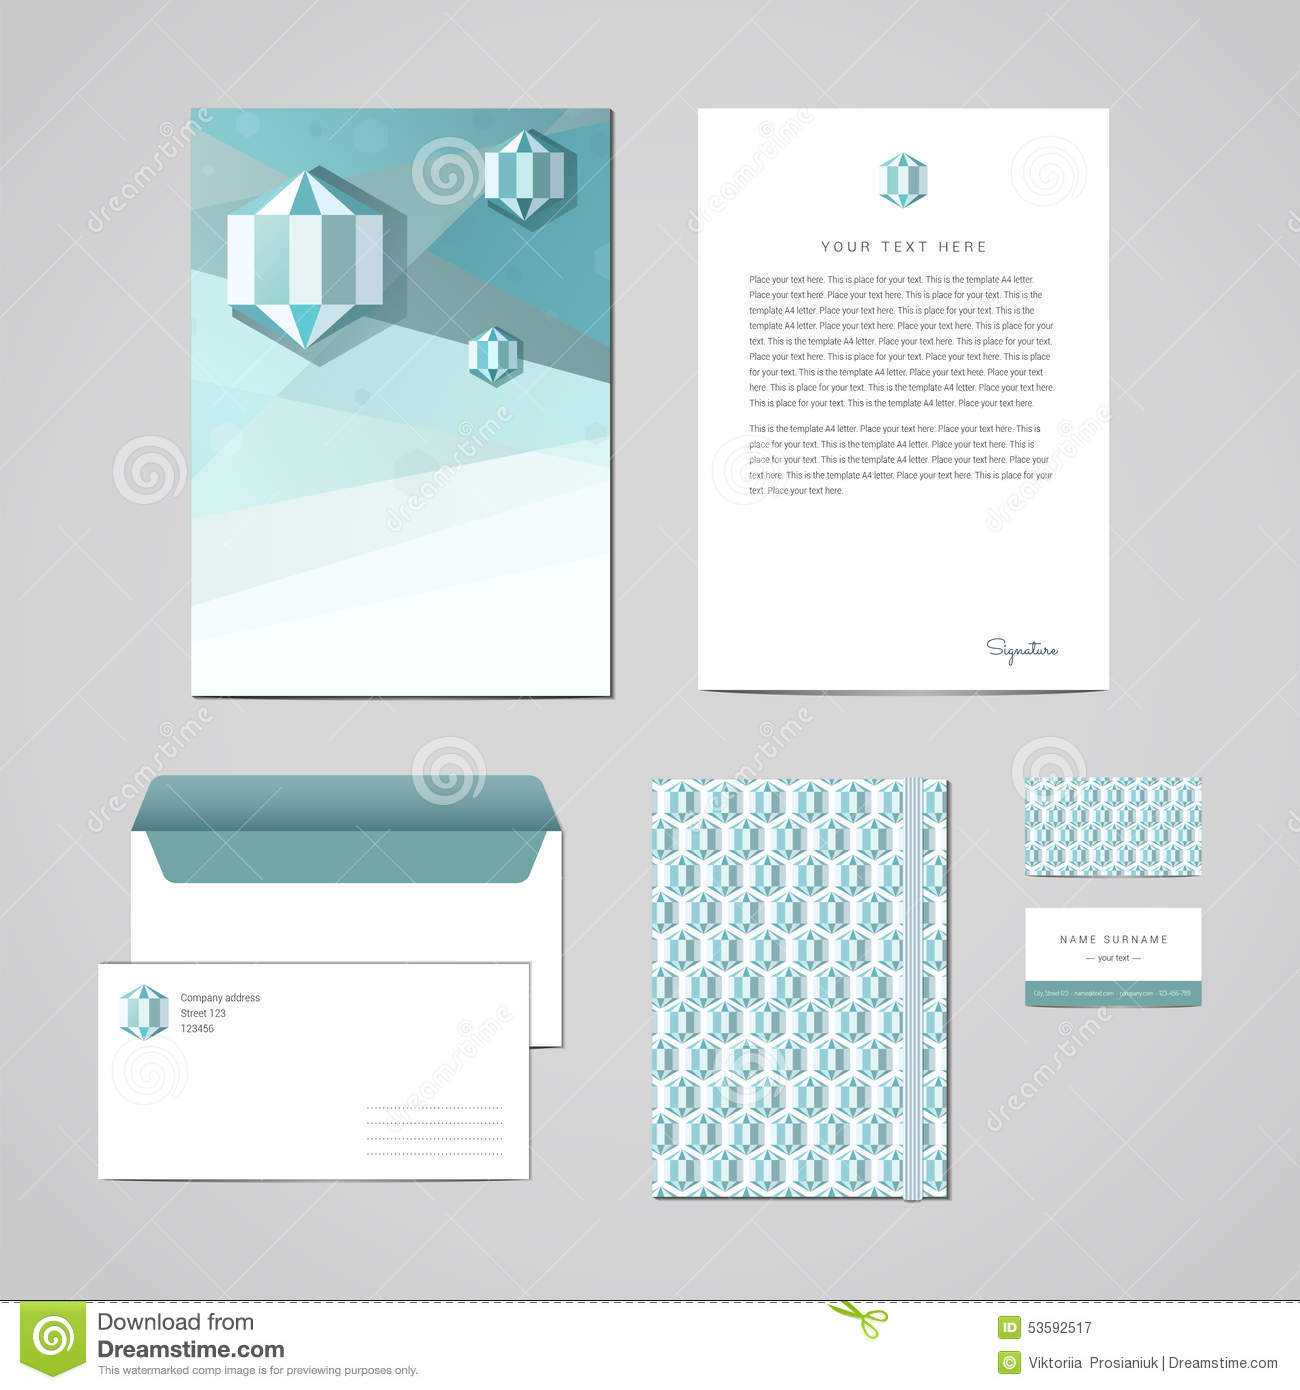 Corporate Identity Design Template. Documentation For For Business Card Letterhead Envelope Template